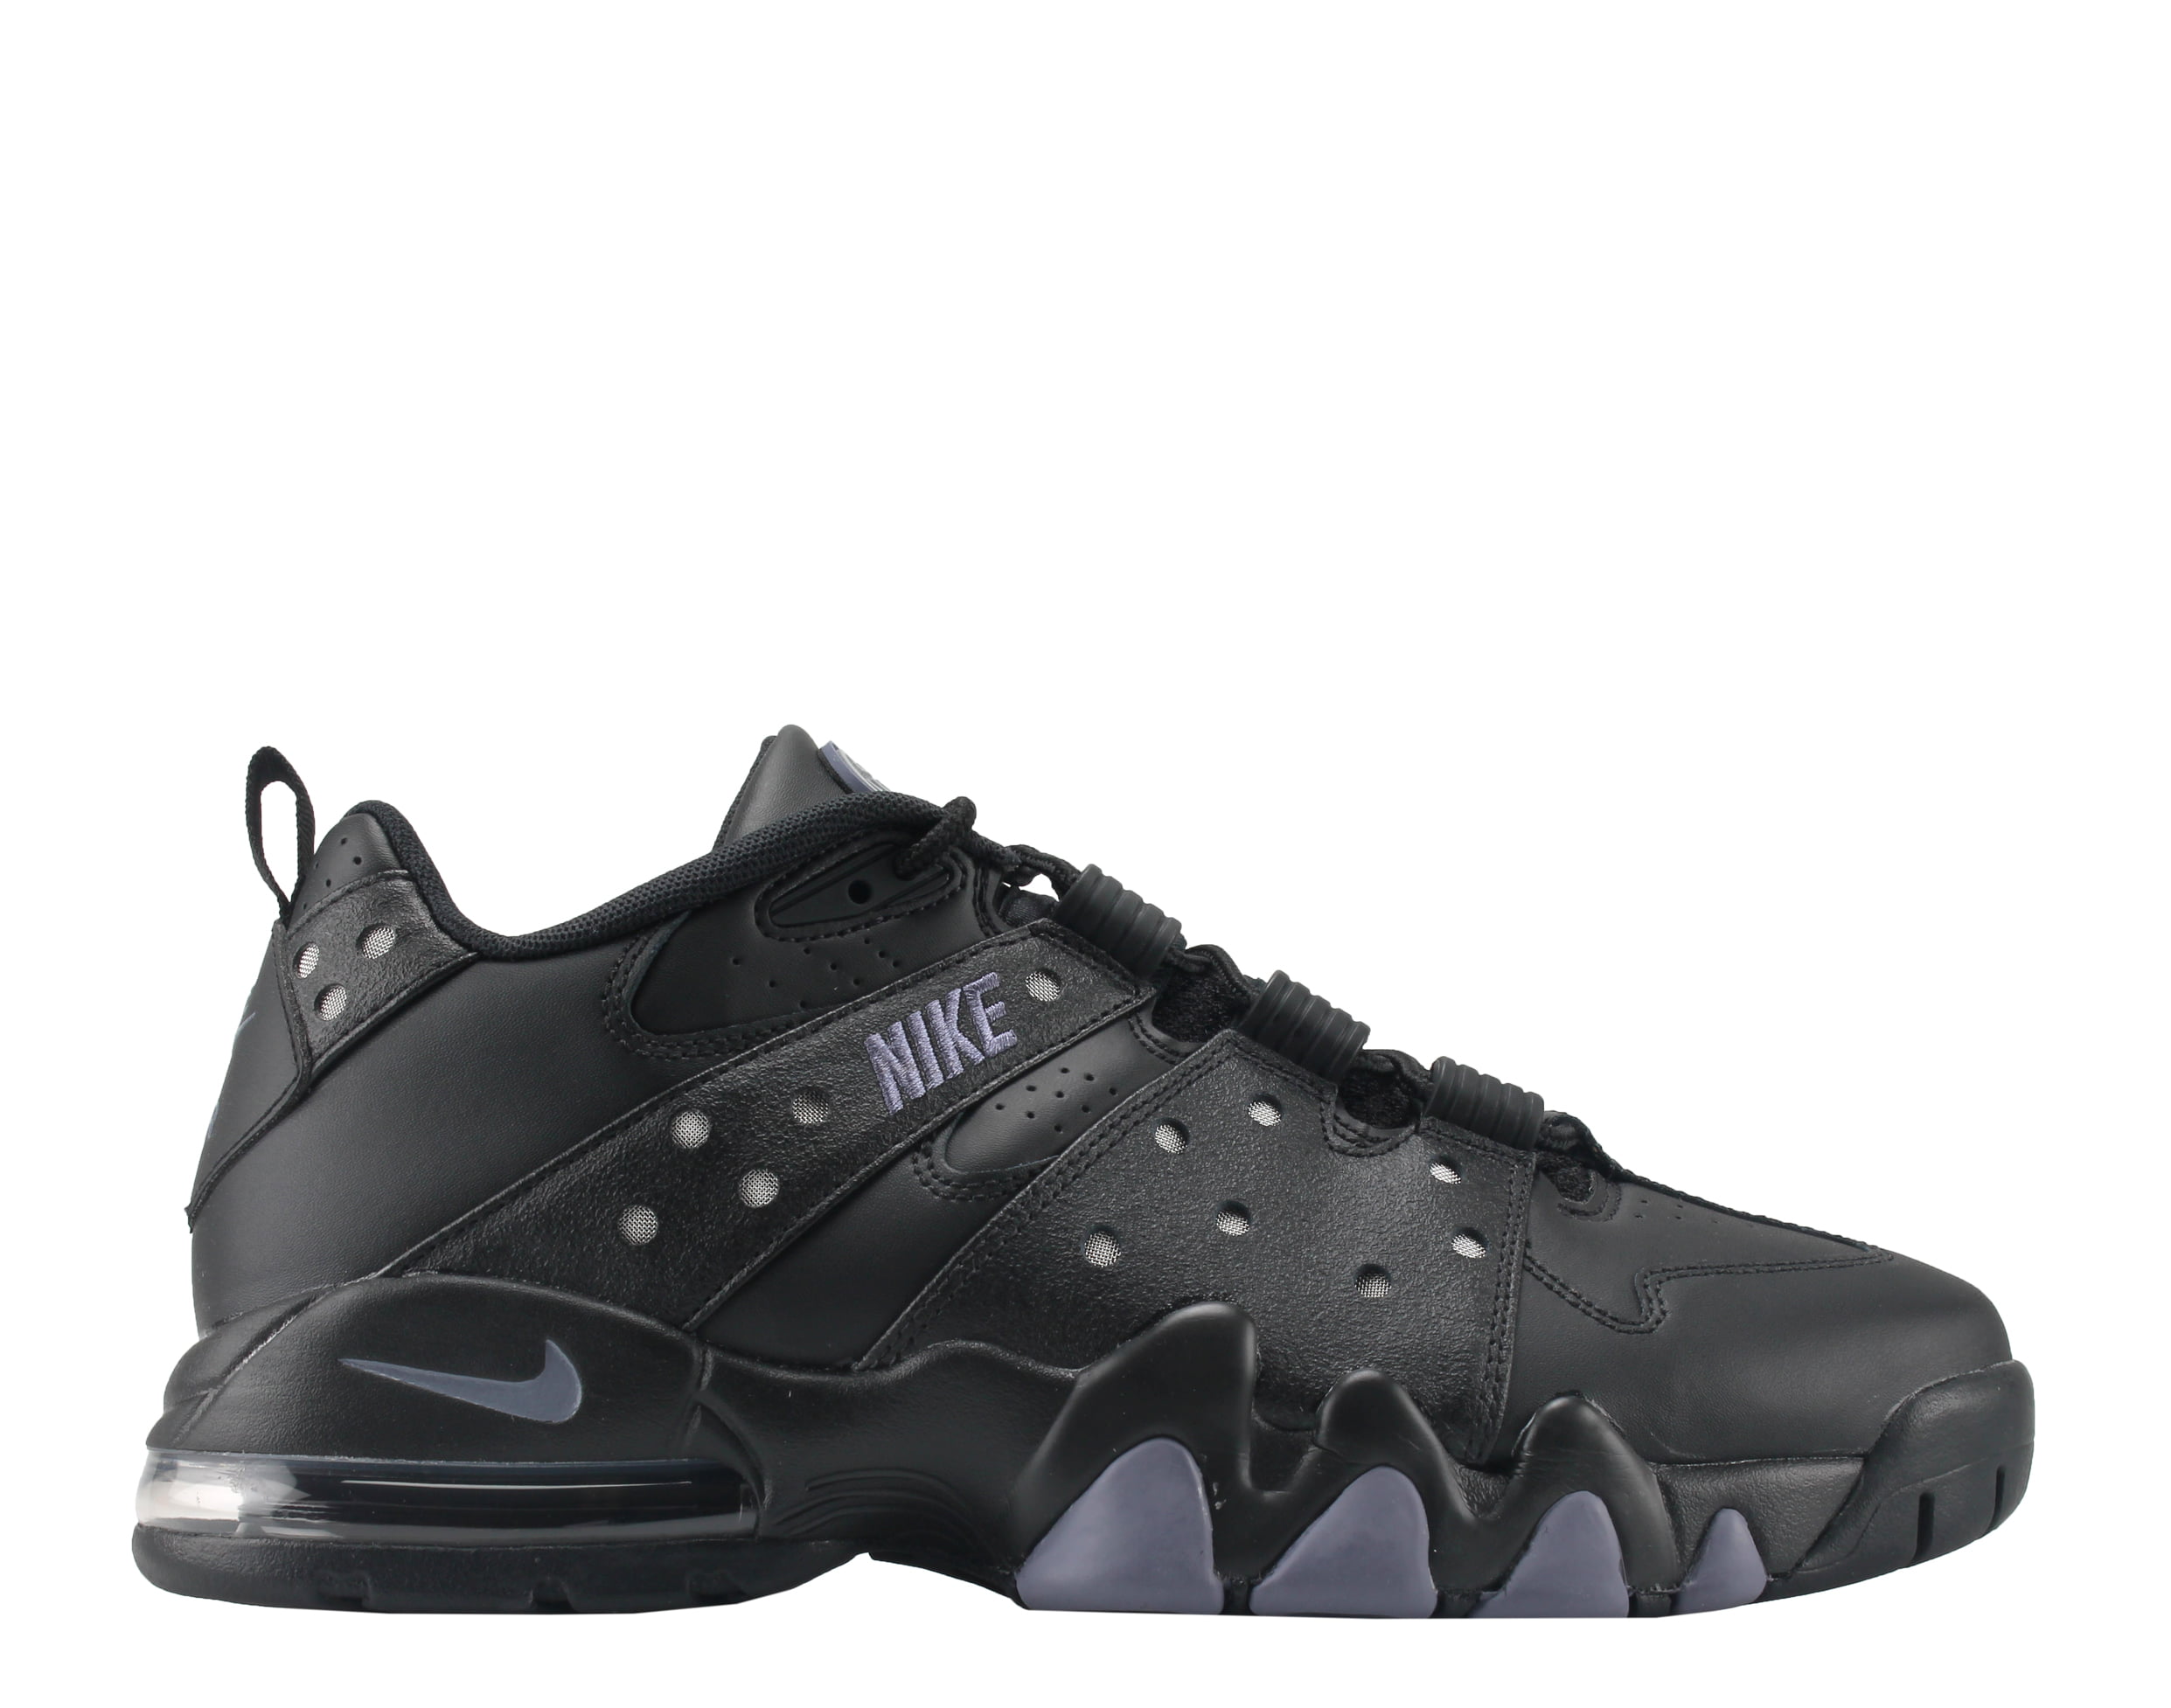 Nike Air Max CB 94 “Mocha Brown” sneakers: Where to get and more